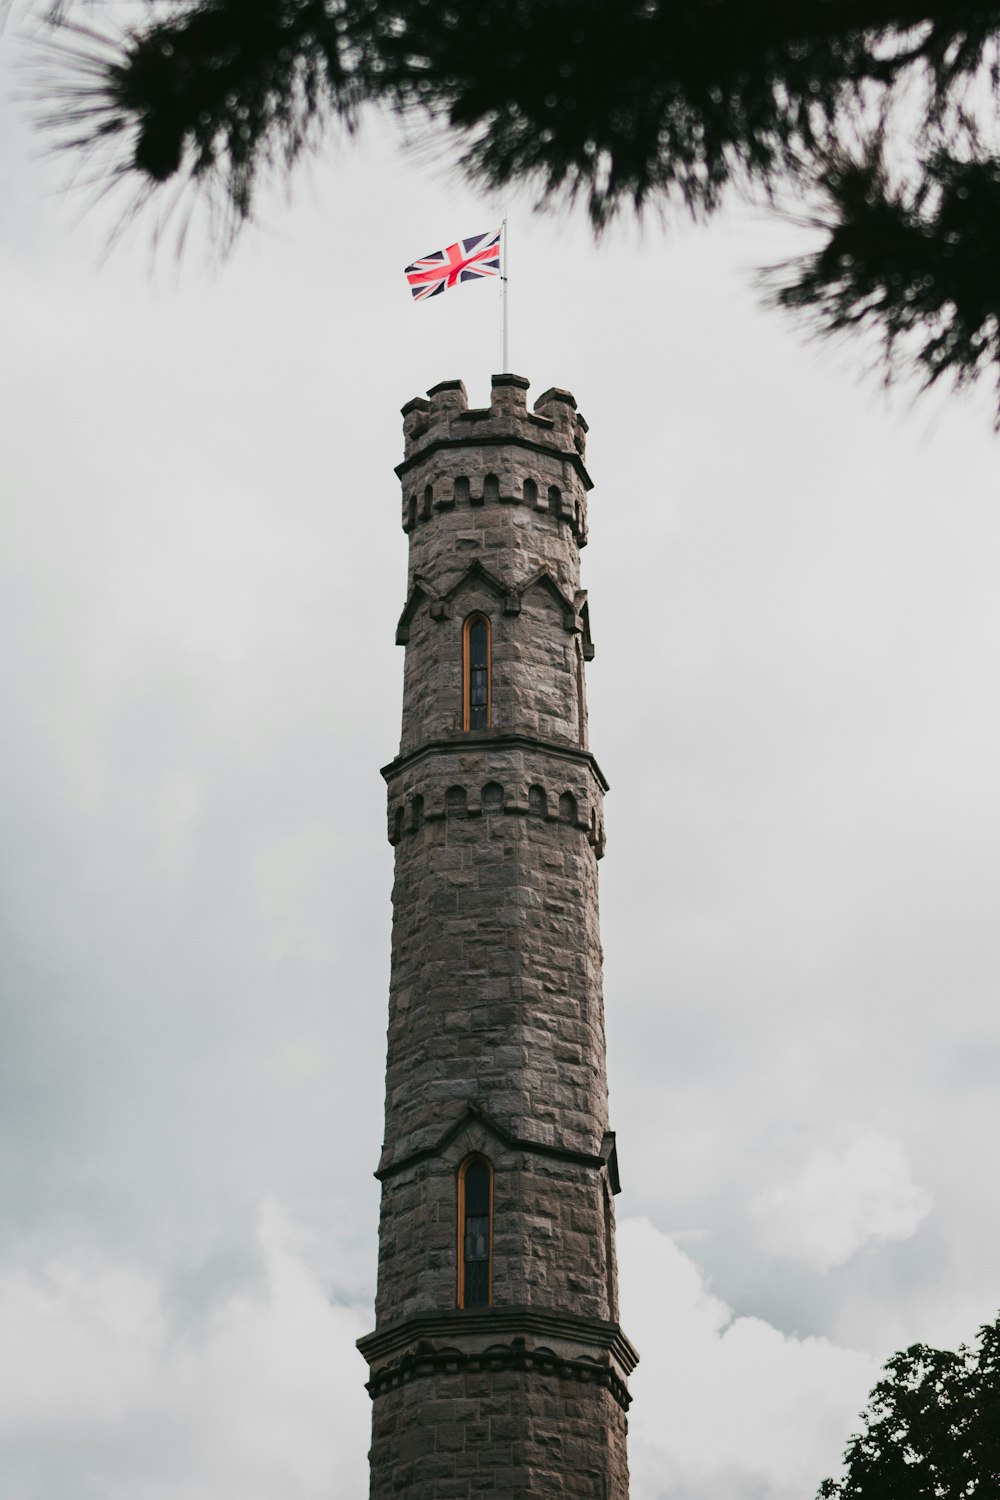 gray concrete tower with UK flag